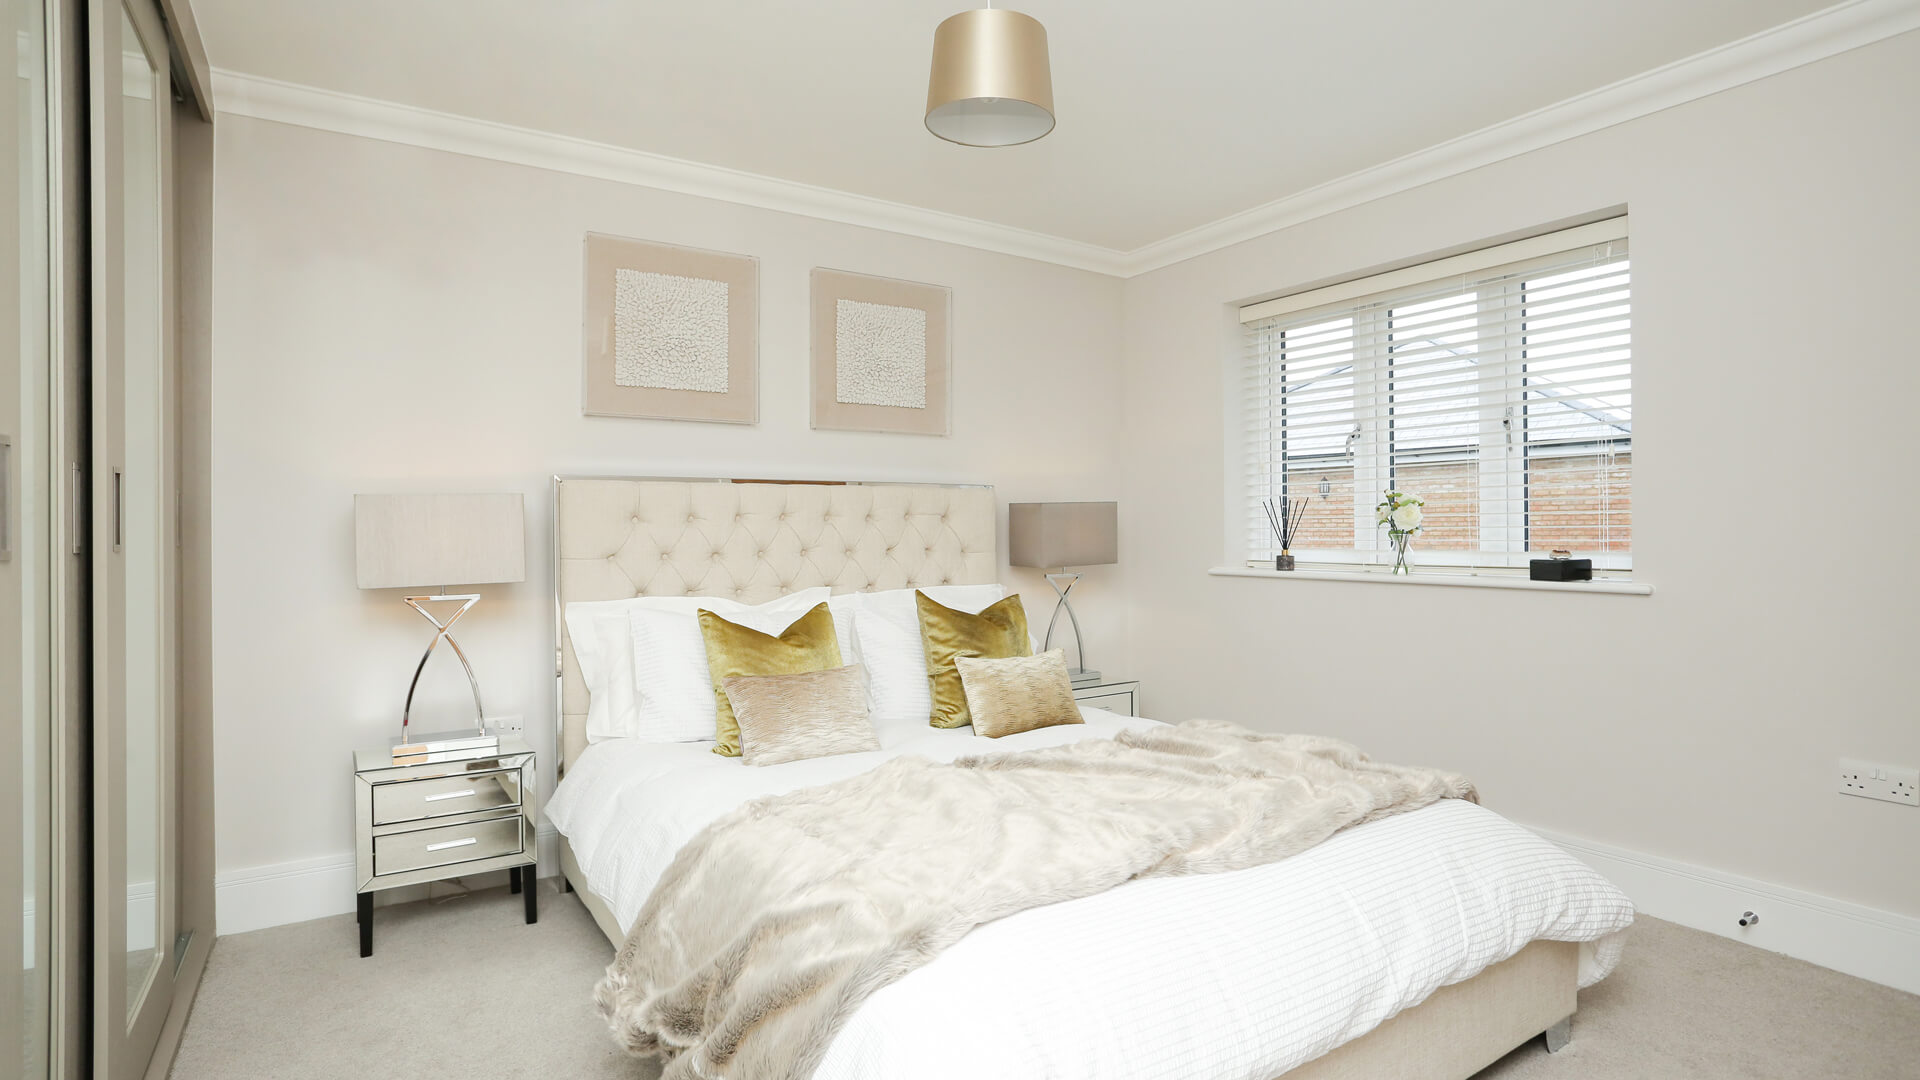 Master bedroom with fitted sliding wardrobe at Plot 9 Mulberry place.